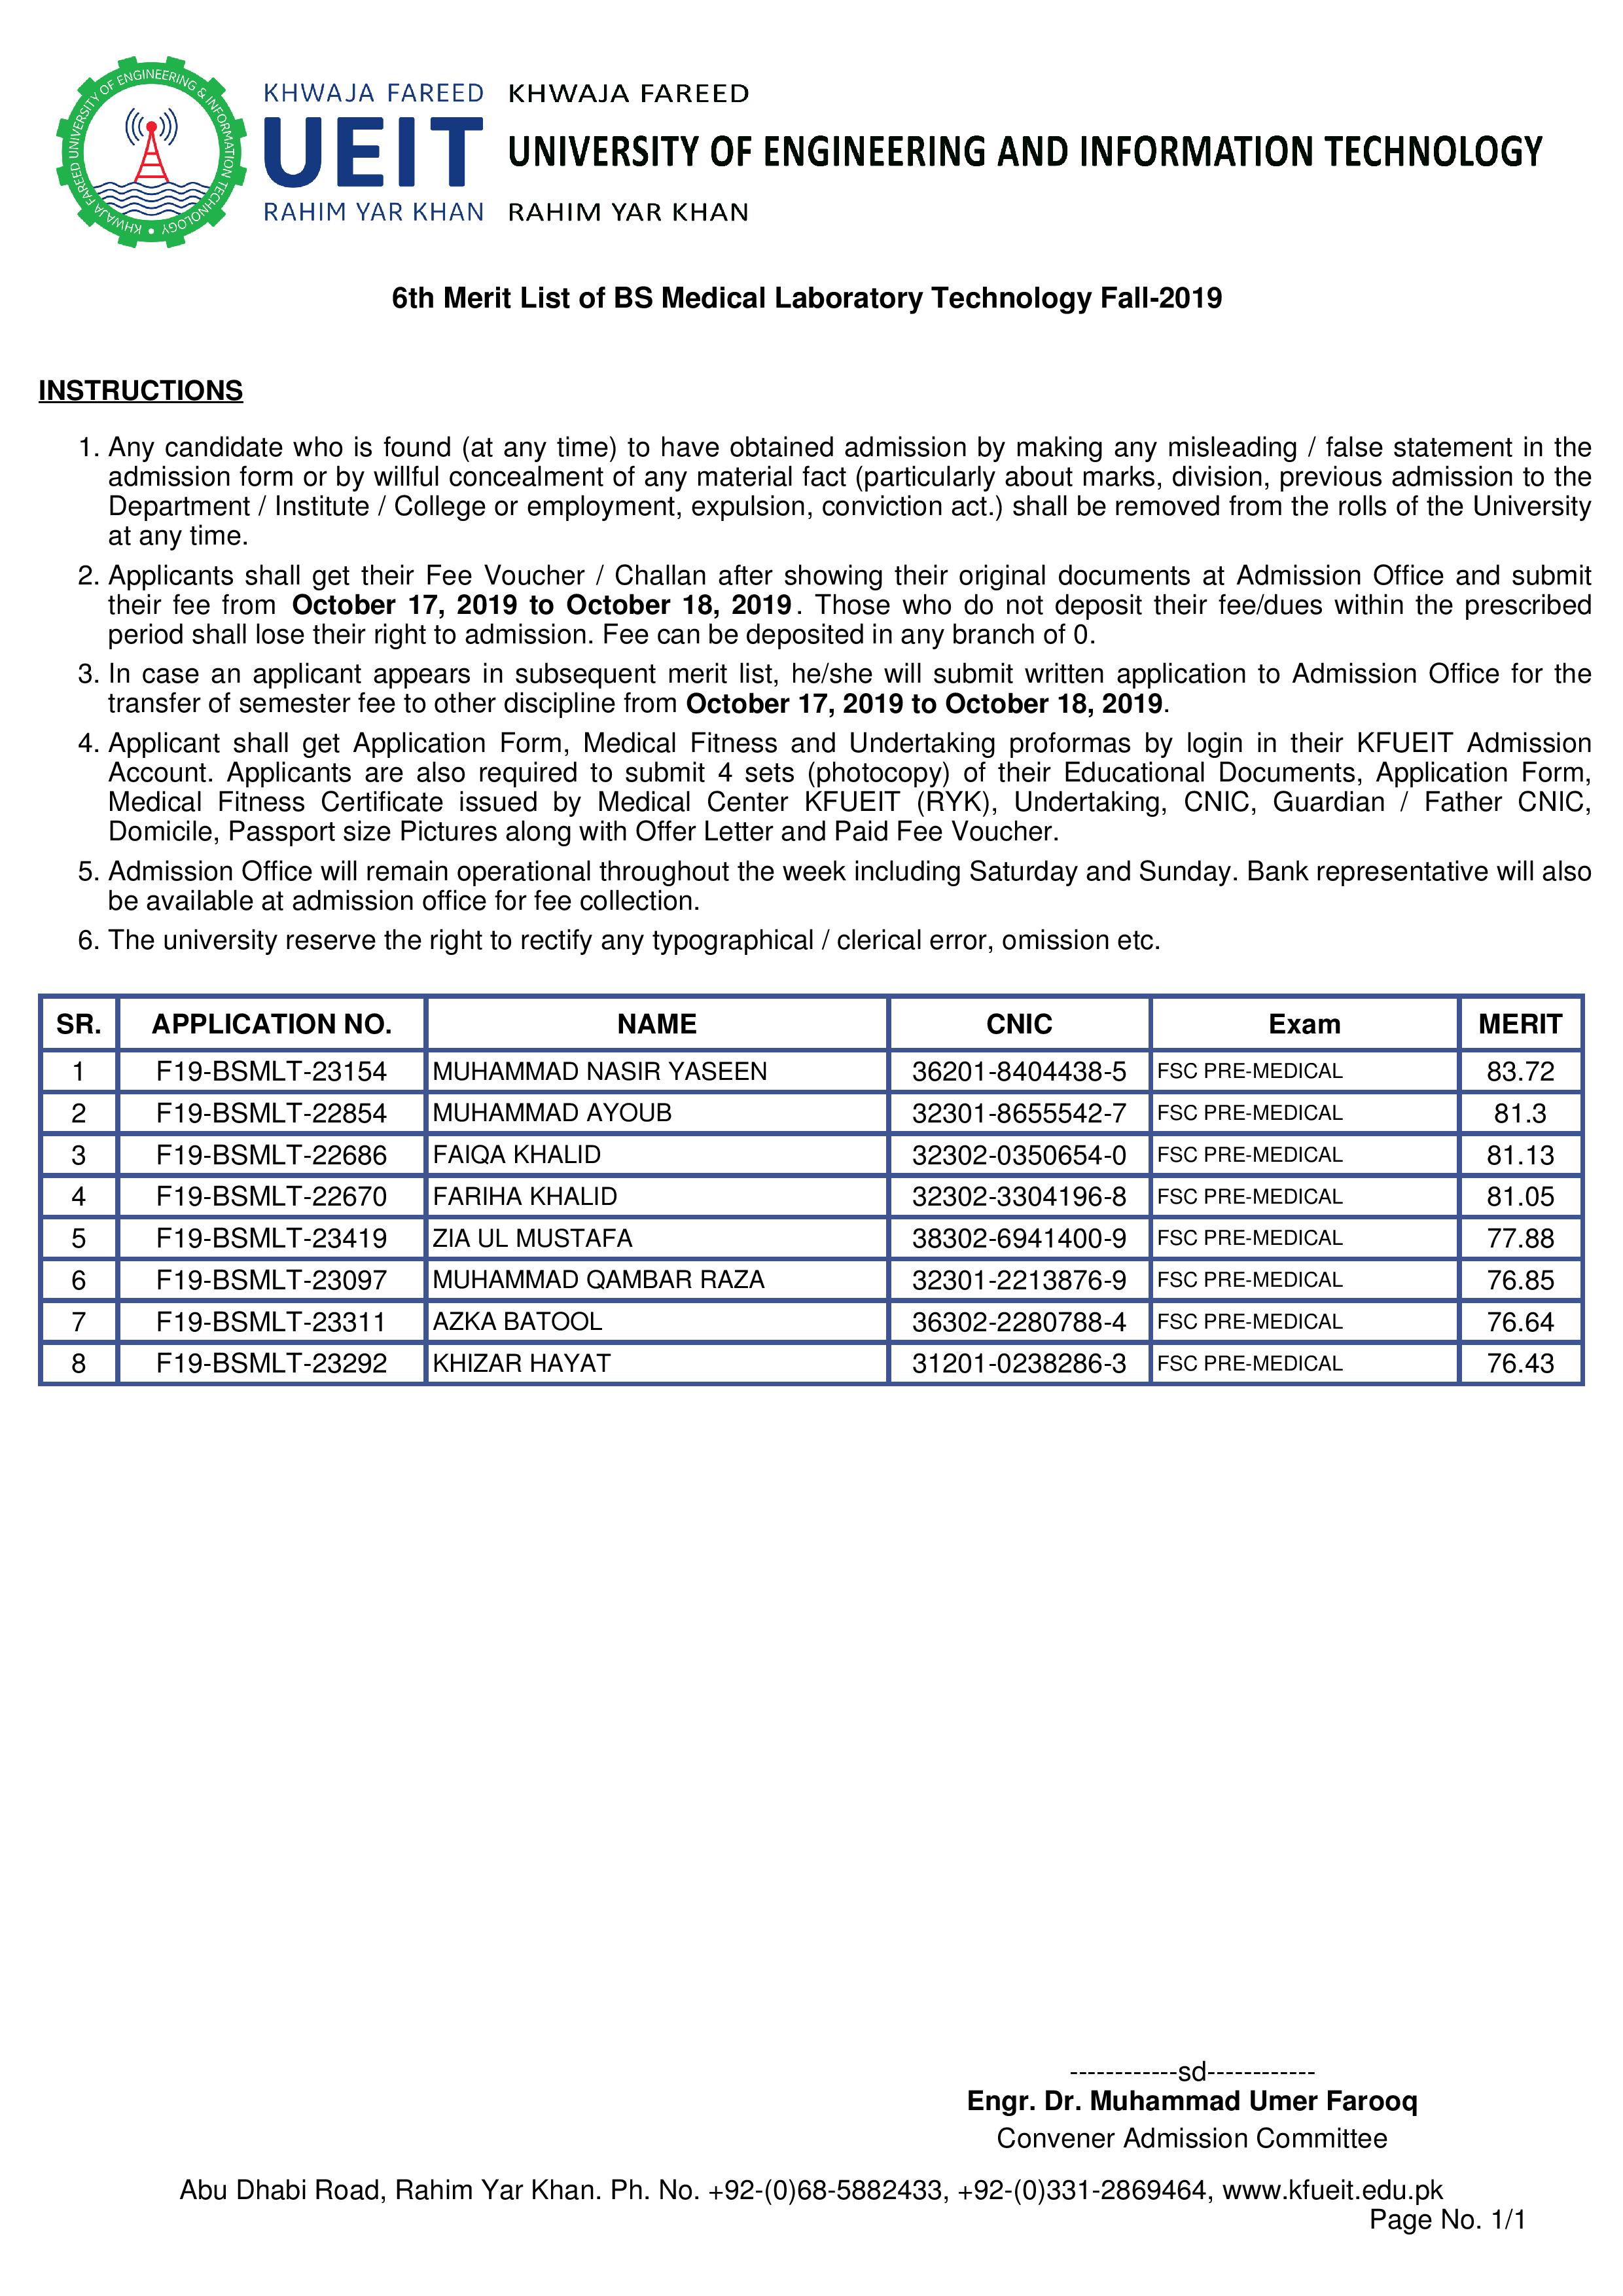 6th Merit List of BS Medical Laboratory Technology Fall-2019-page-001-1